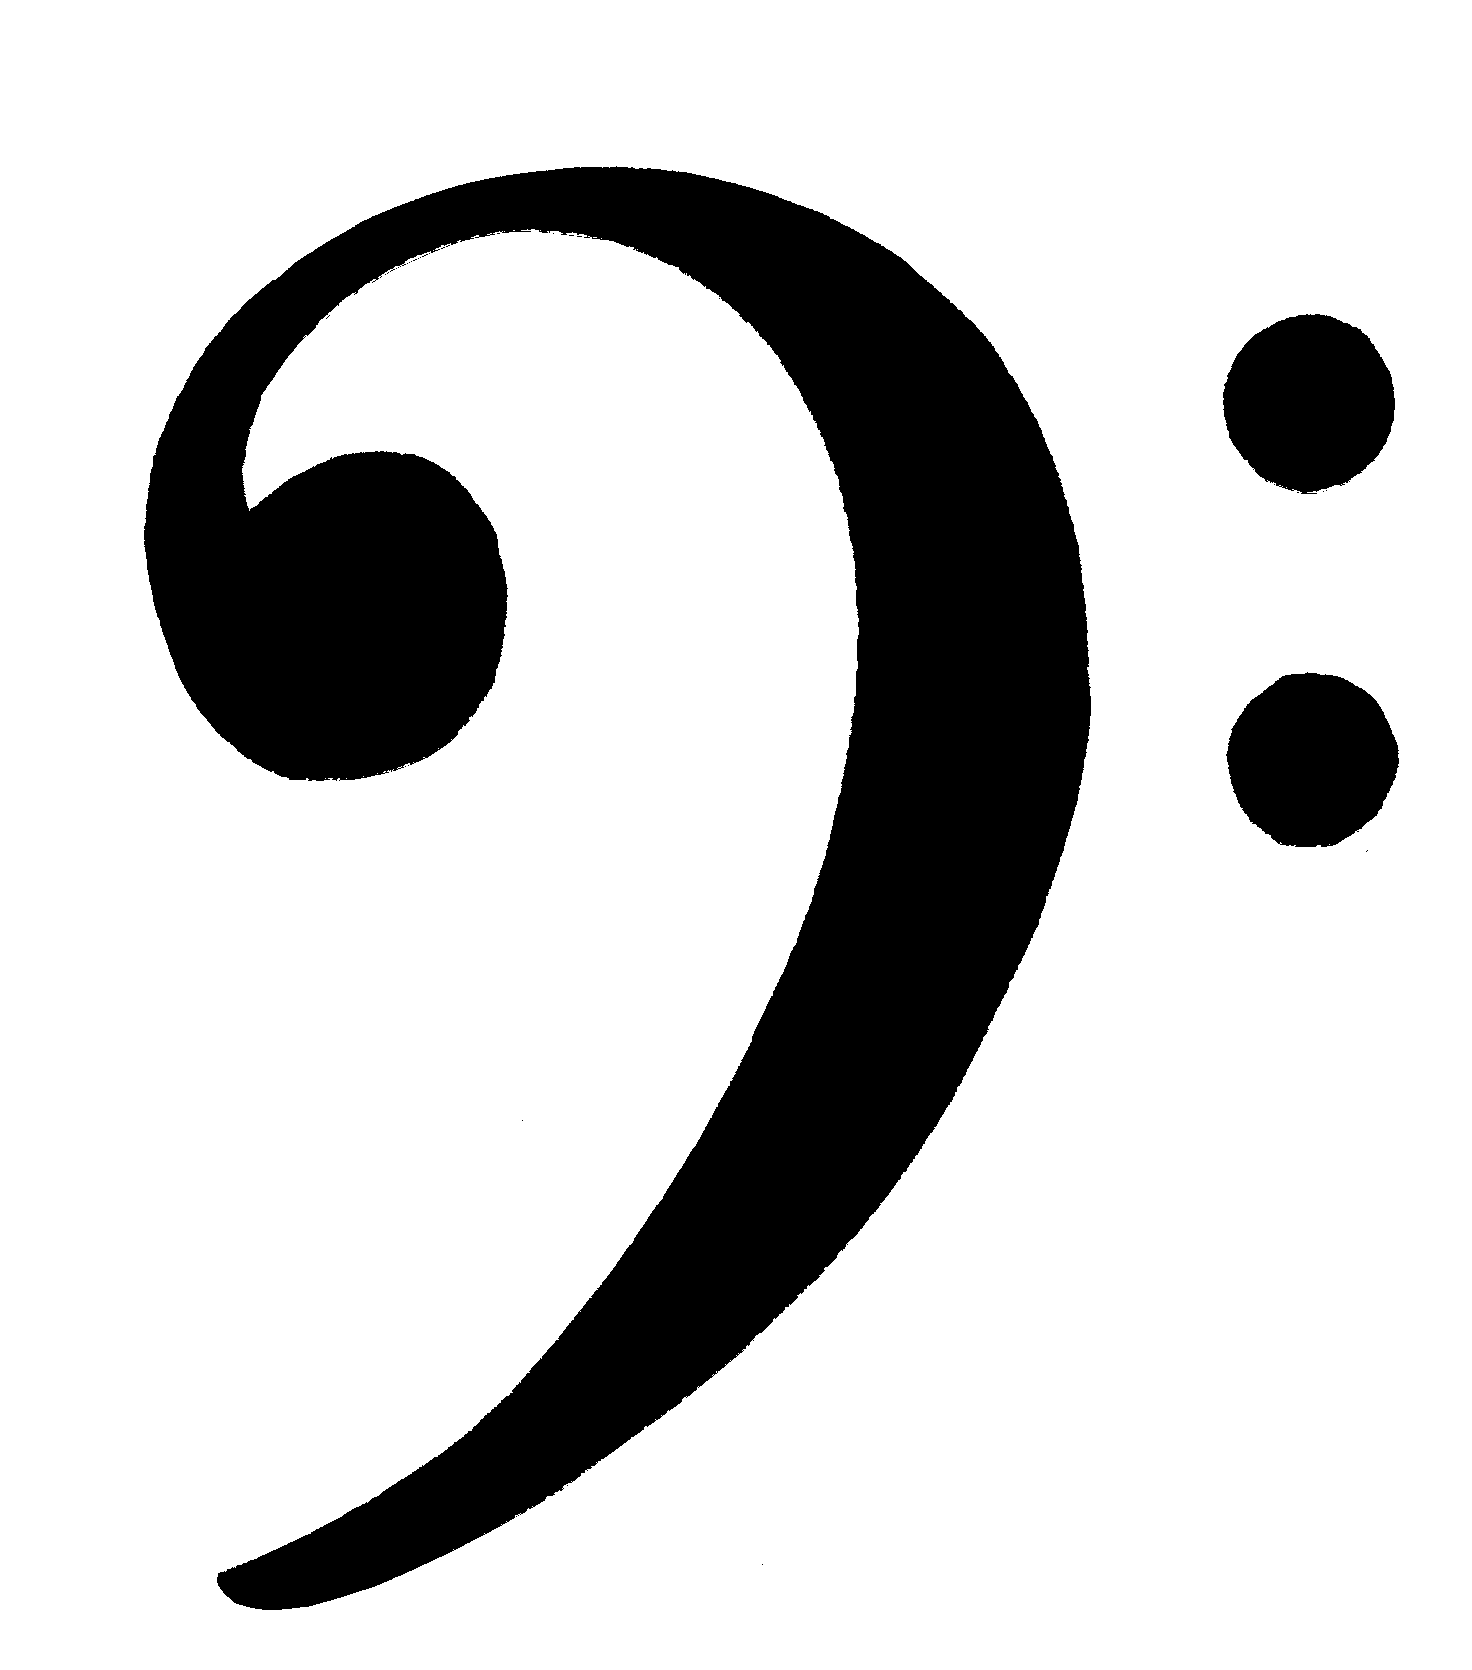 Free Bass Clef Transparent Background, Download Free Clip.